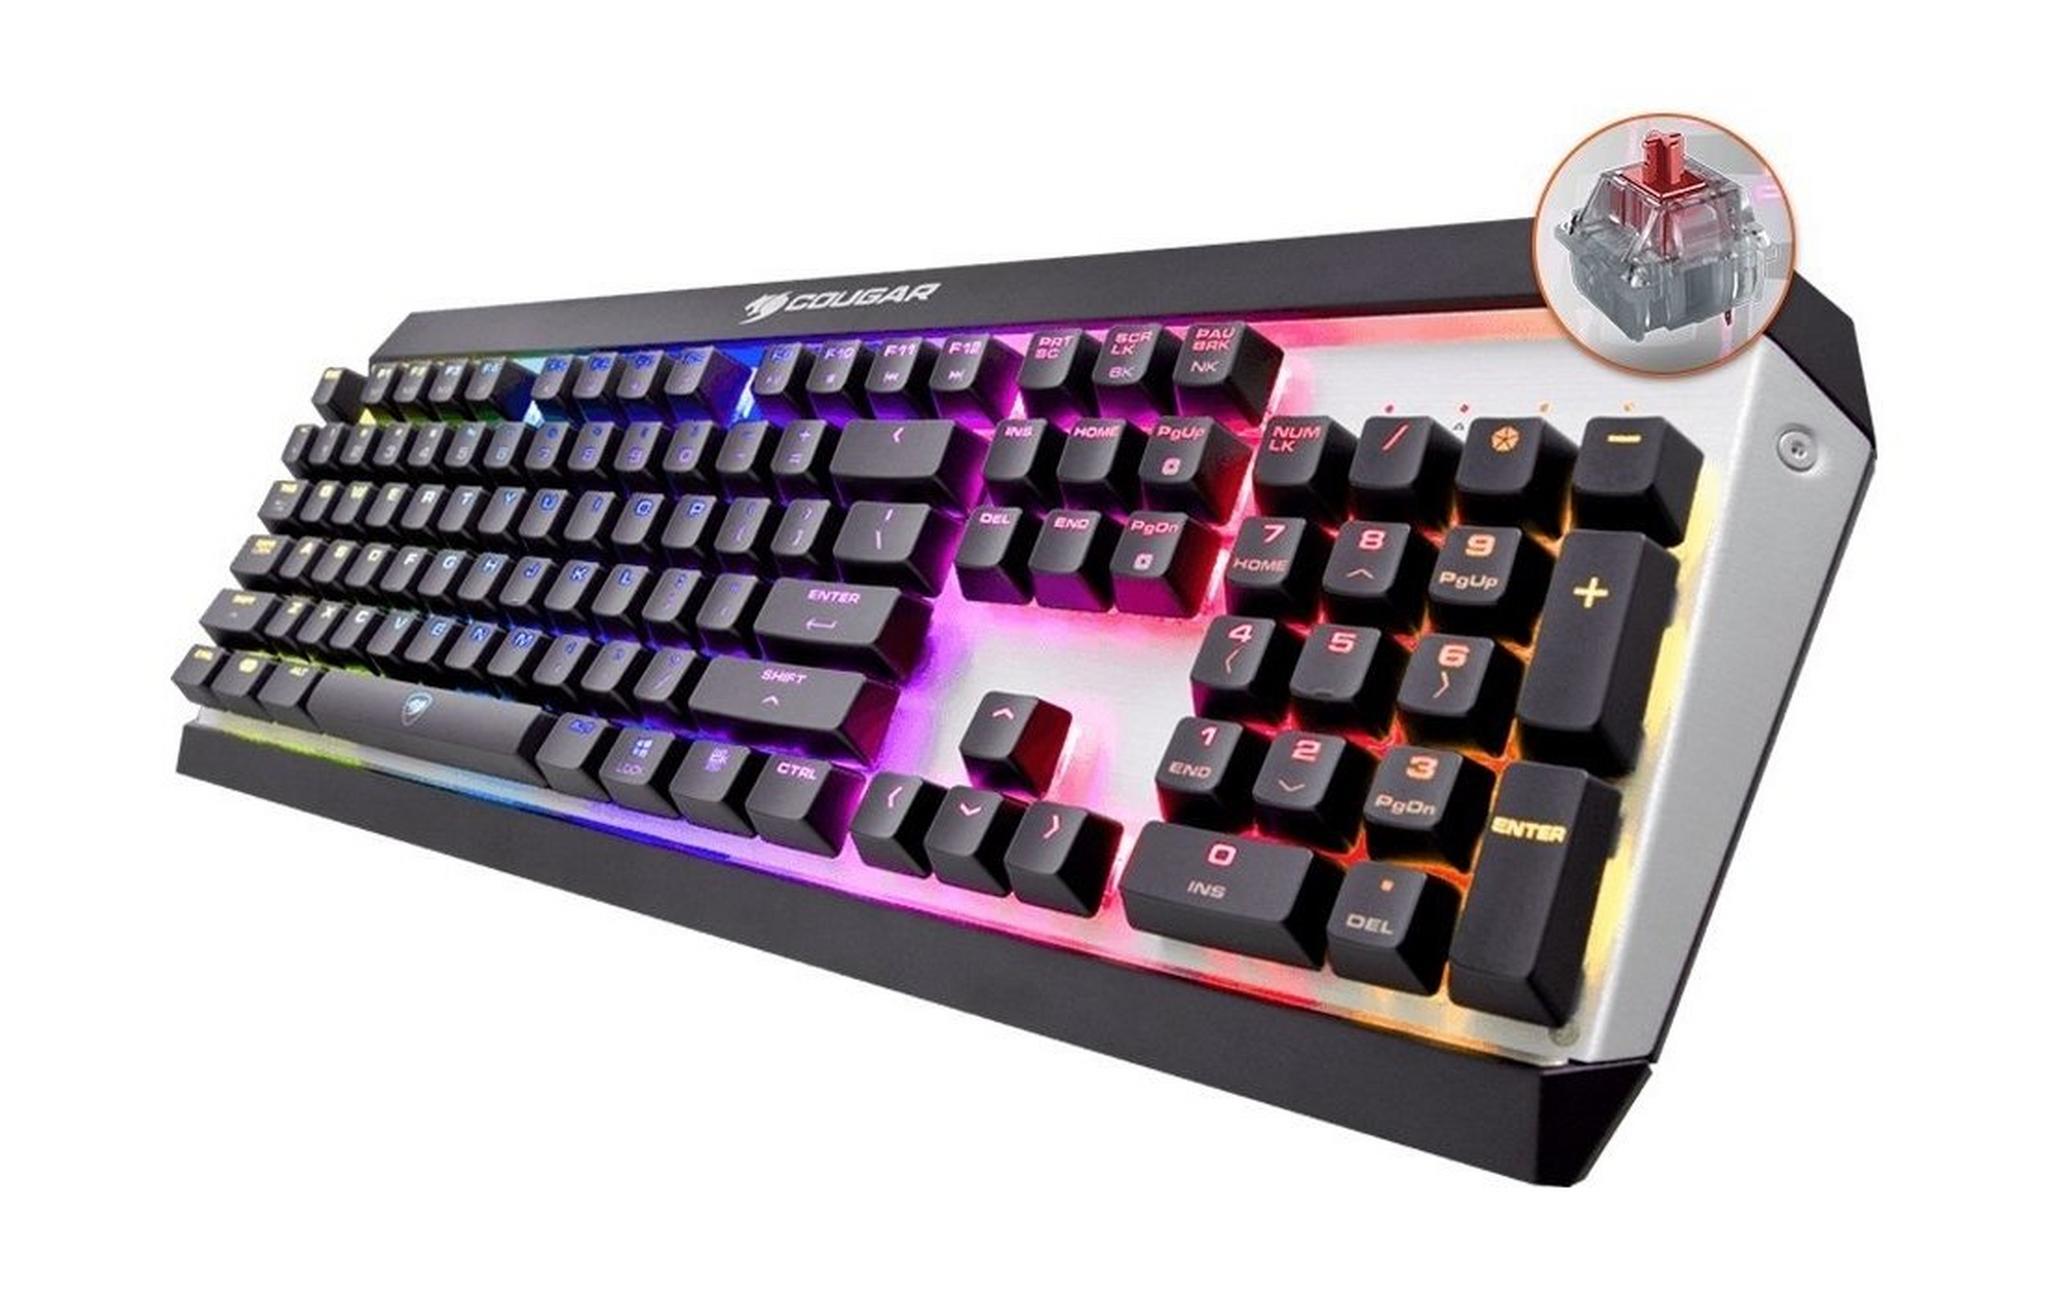 Cougar Attack X3 RGB Mechanical Gaming Keyboard - Cherry MX Red Switches